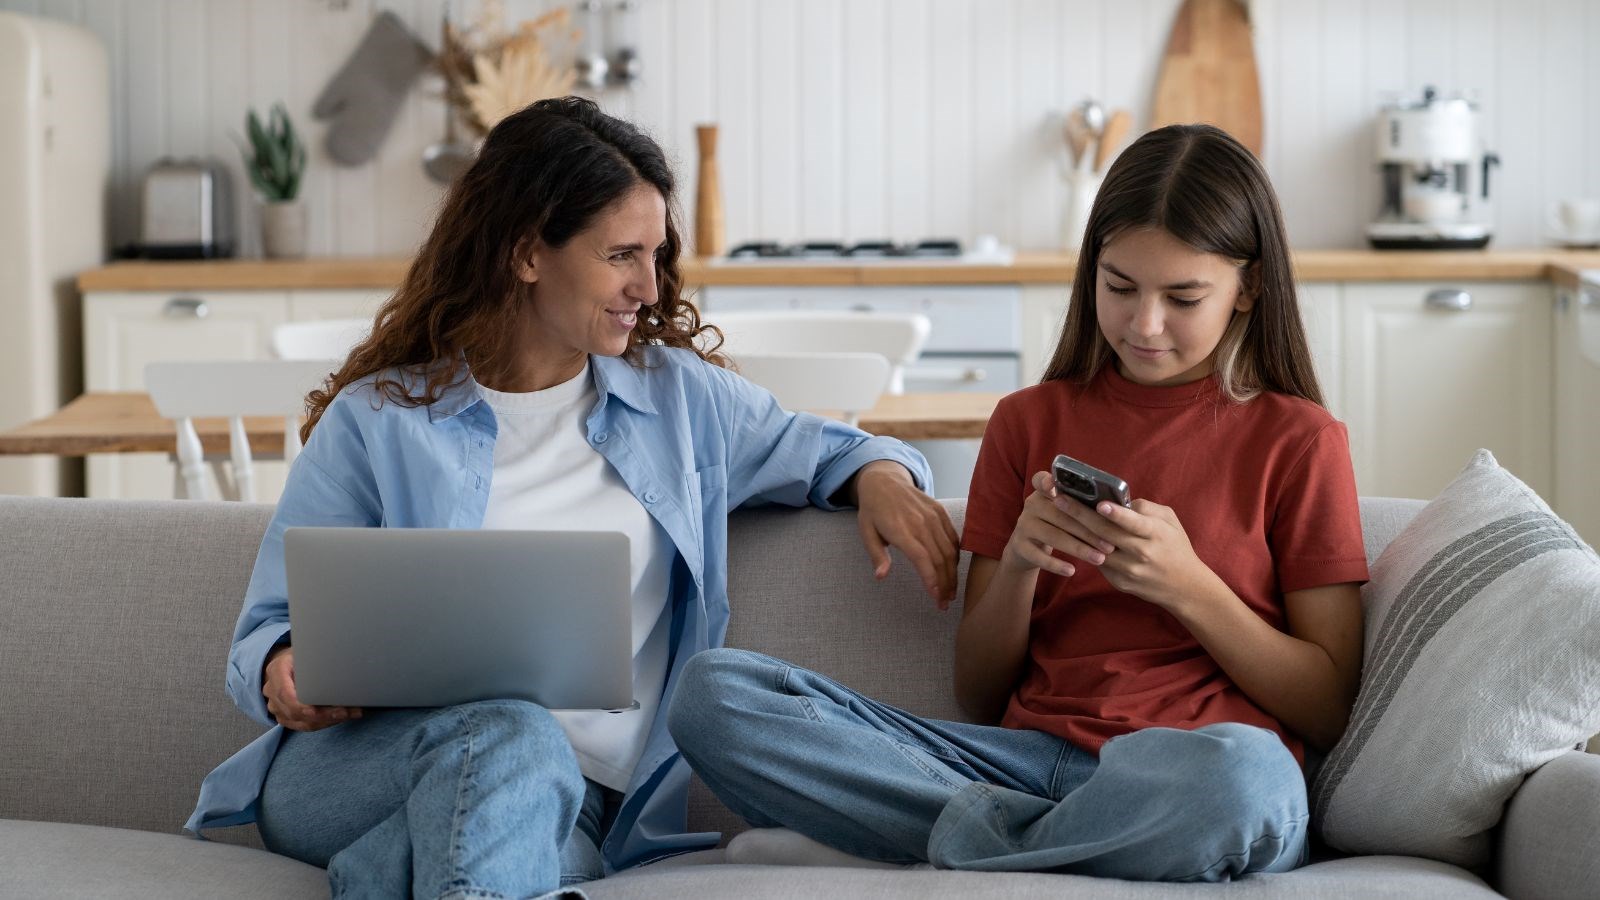 Mom with a laptop and daughter on a cell phone sit together on a couch.